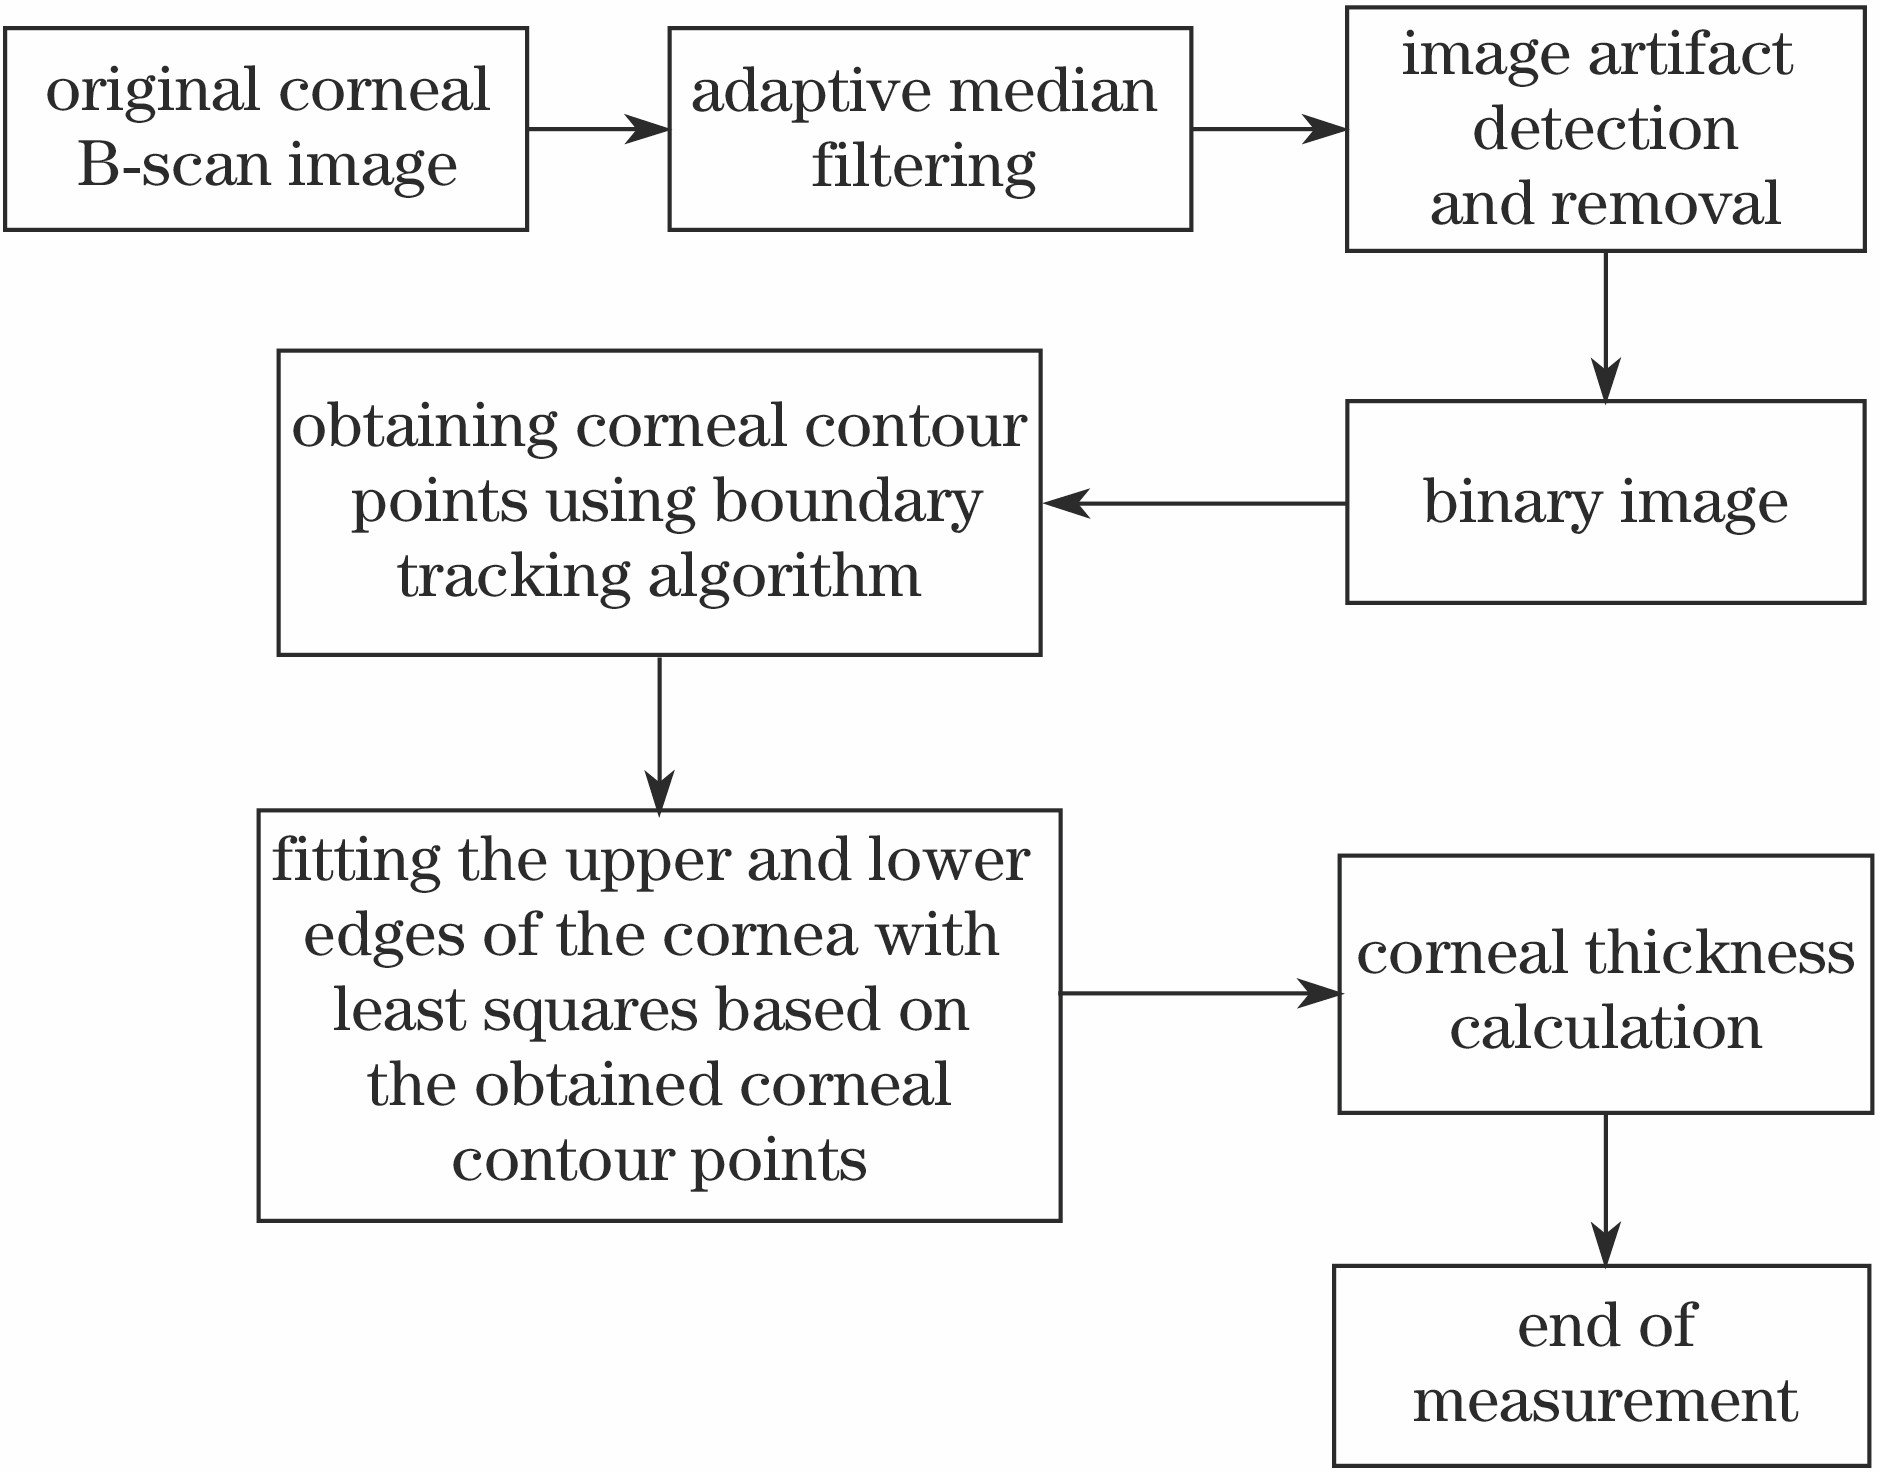 Flow chart of proposed measurement method of corneal thickness